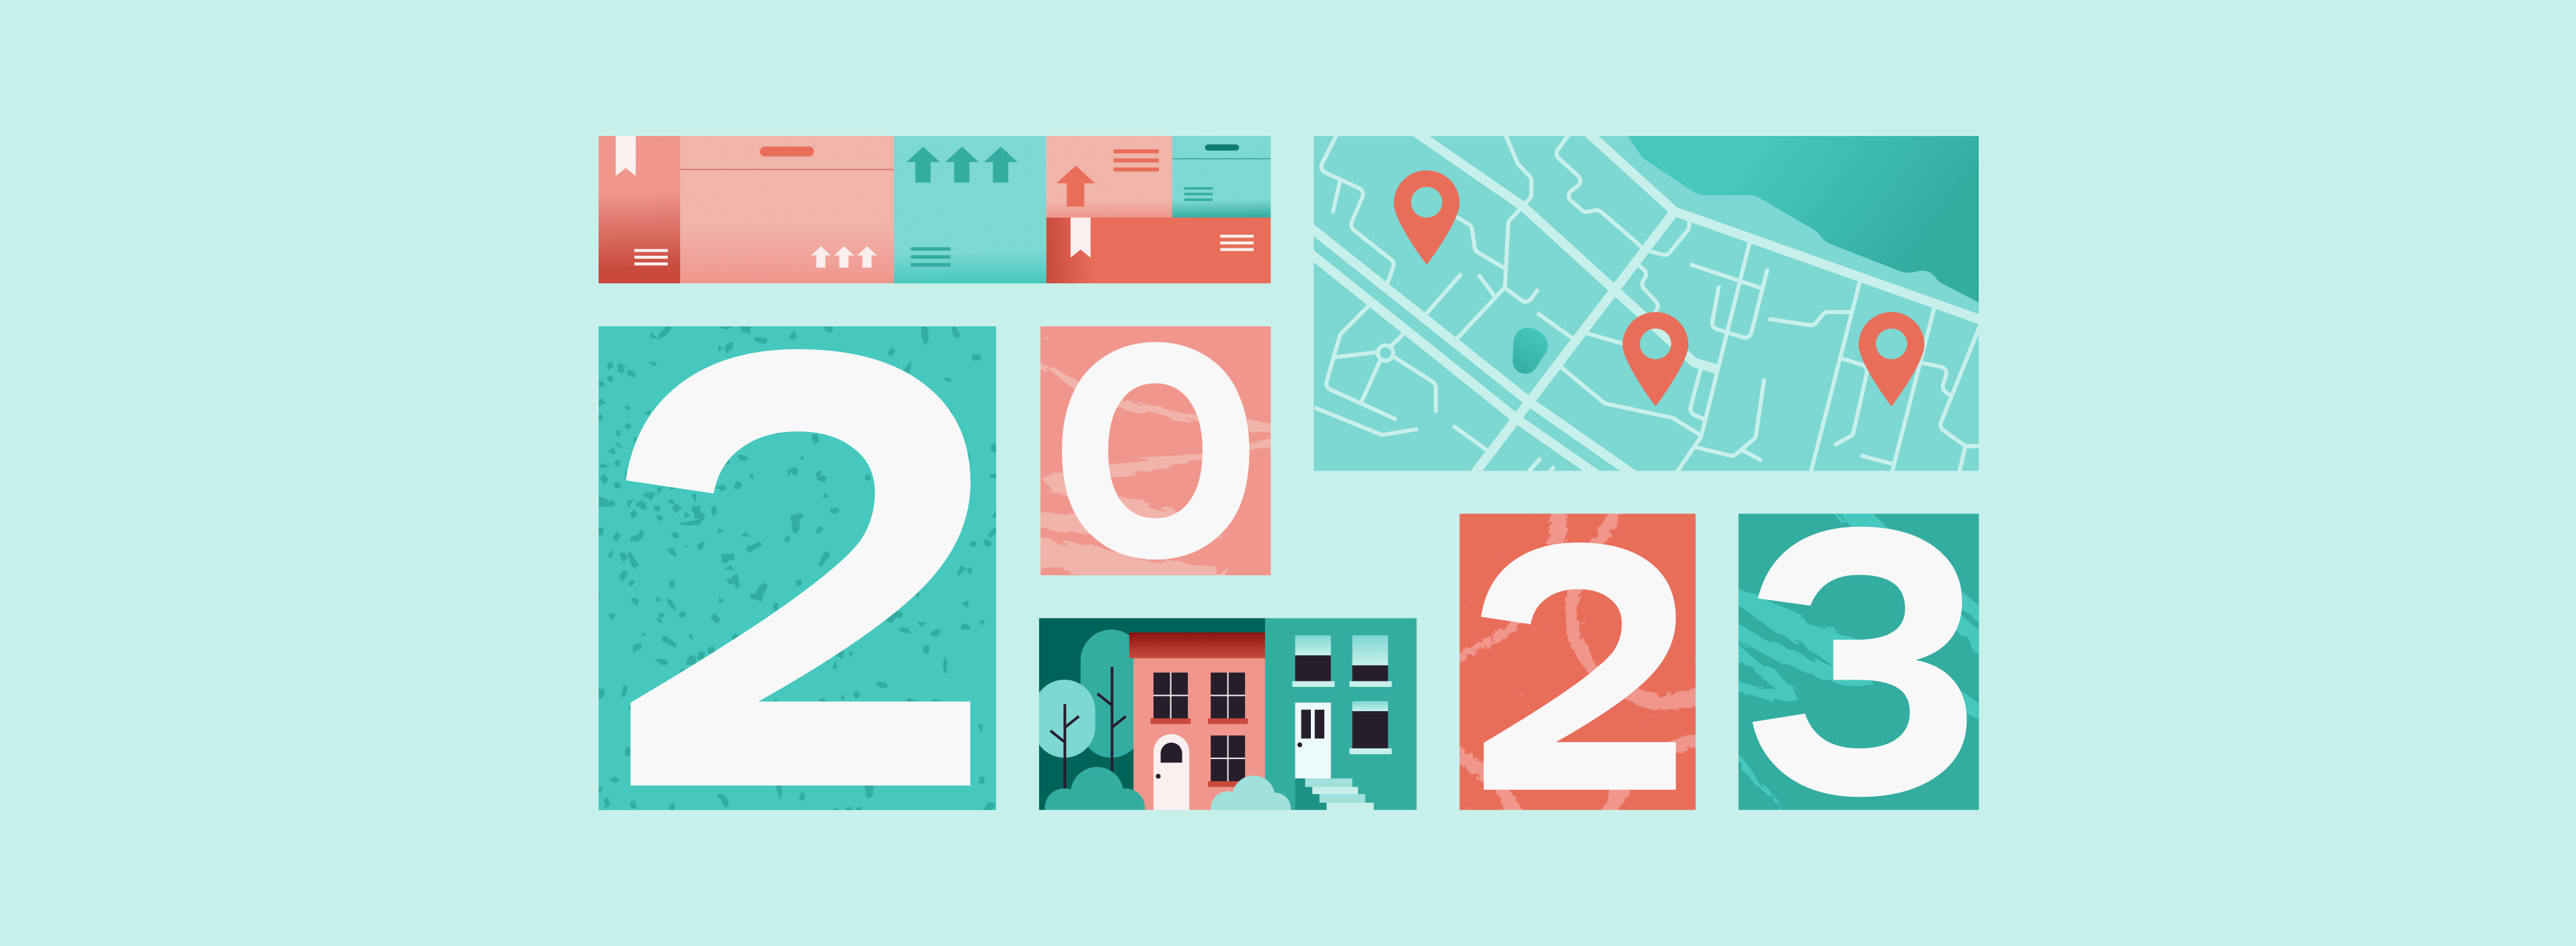 Building trust in 2023: Five location intelligence predictions